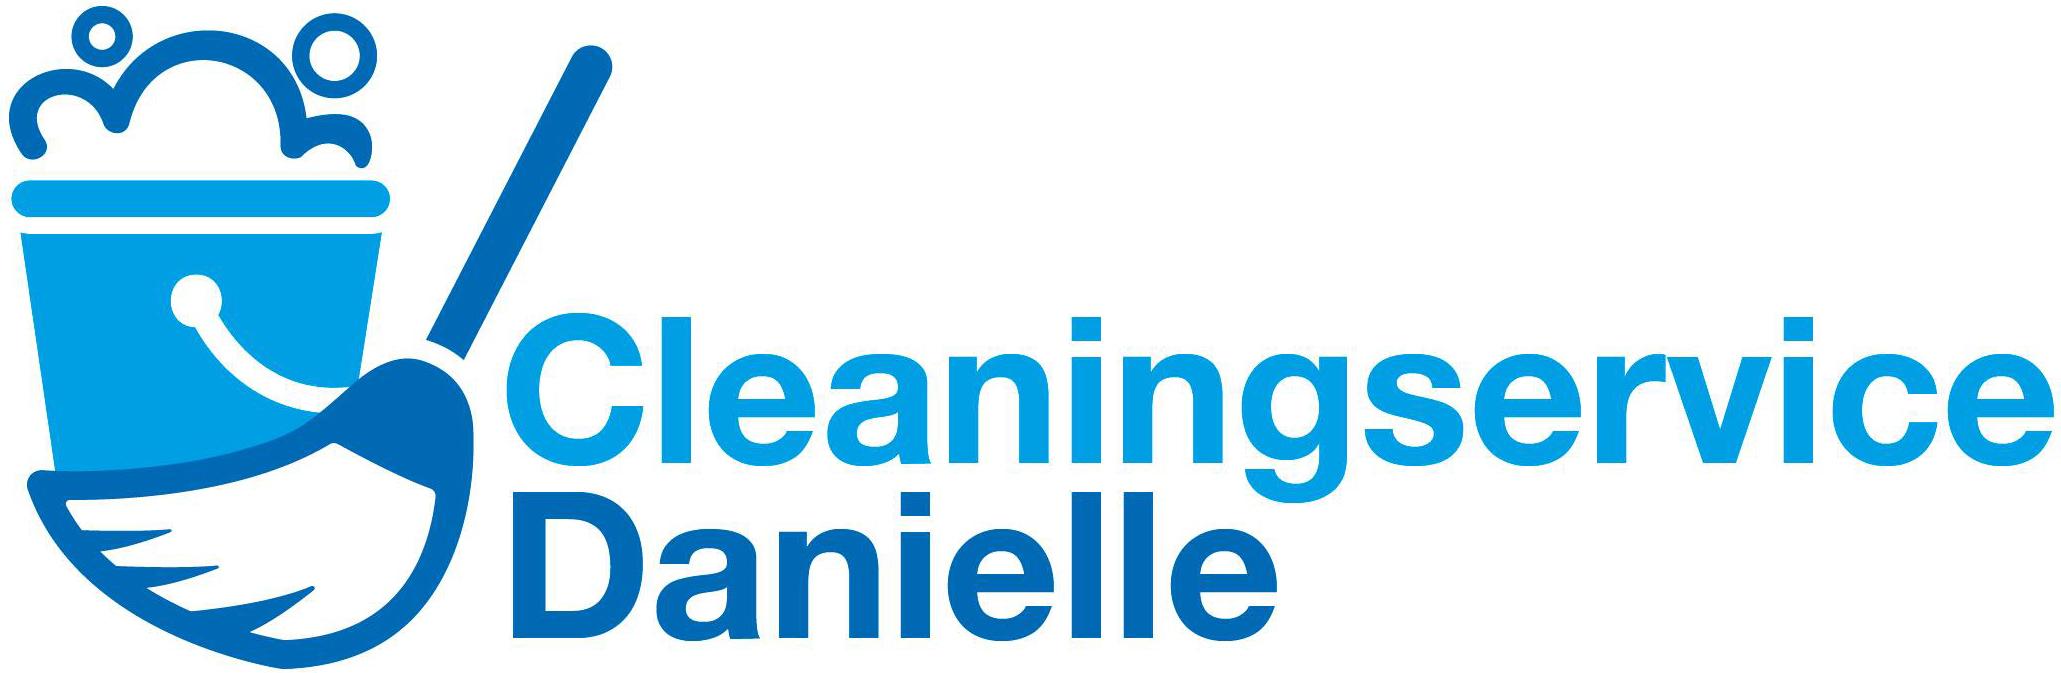 Cleaningservice Danielle